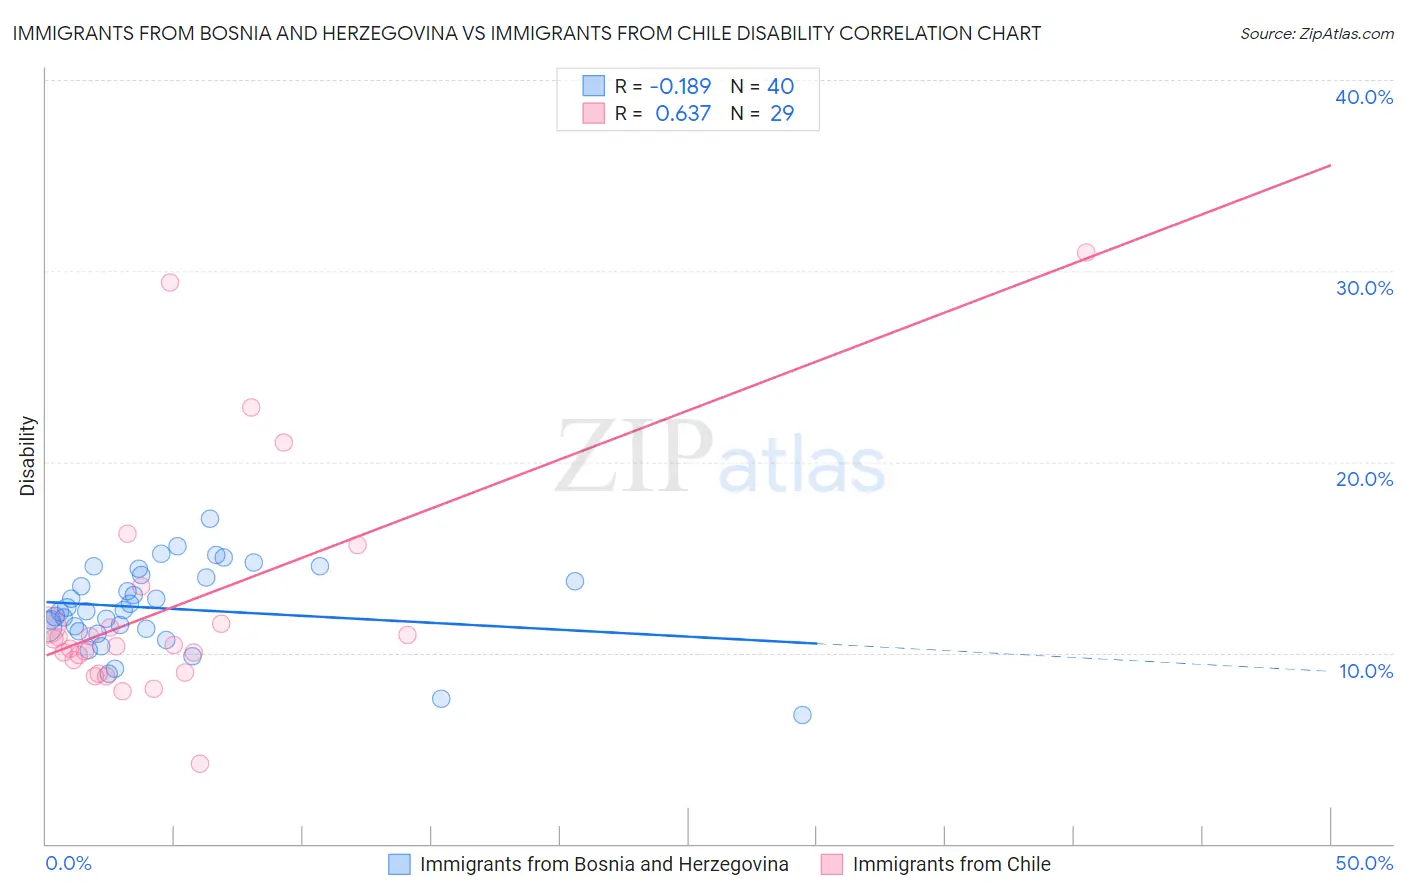 Immigrants from Bosnia and Herzegovina vs Immigrants from Chile Disability